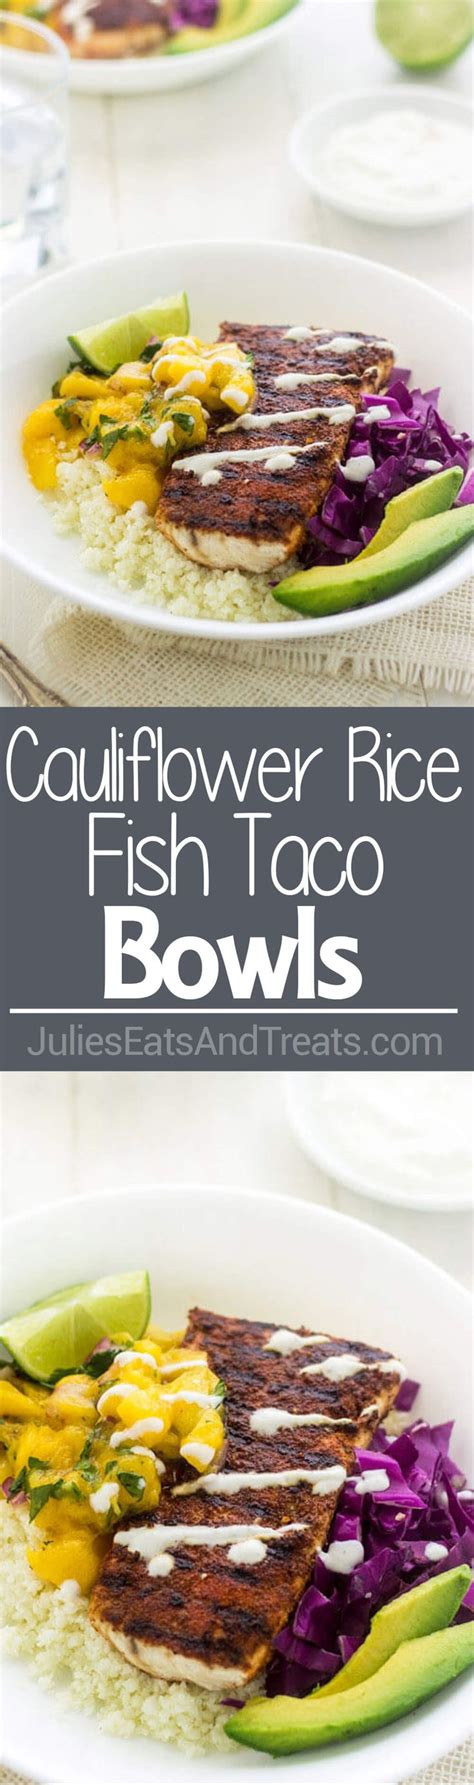 Cauliflower Rice Fish Taco Bowls A Quick And Easy Weeknight Dinner